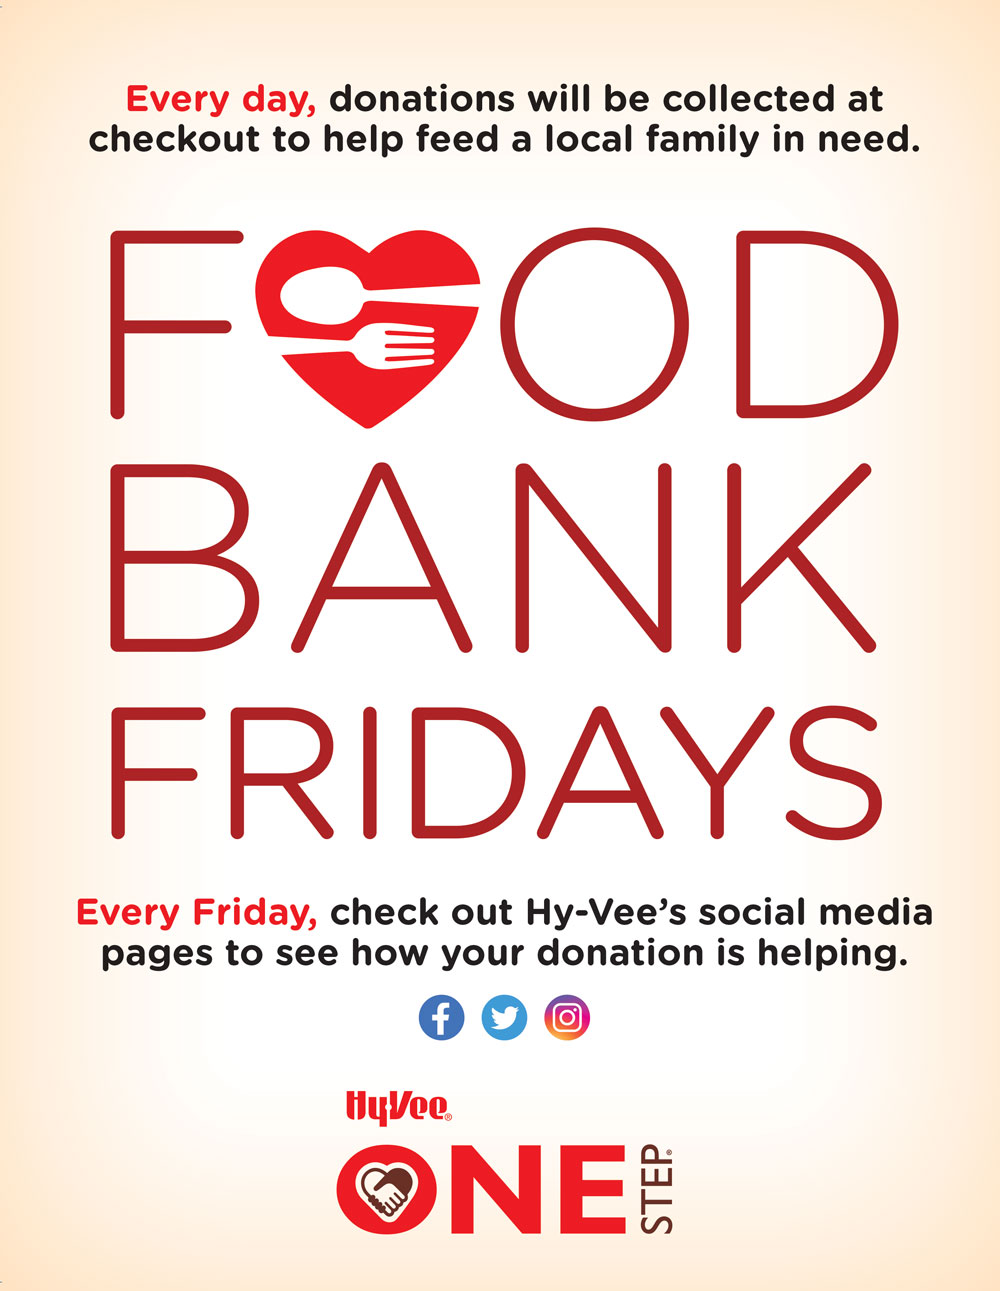 Hy-Vee One Step "Food Bank Fridays" Fundraiser - Company - Hy-Vee - Your employee-owned grocery store